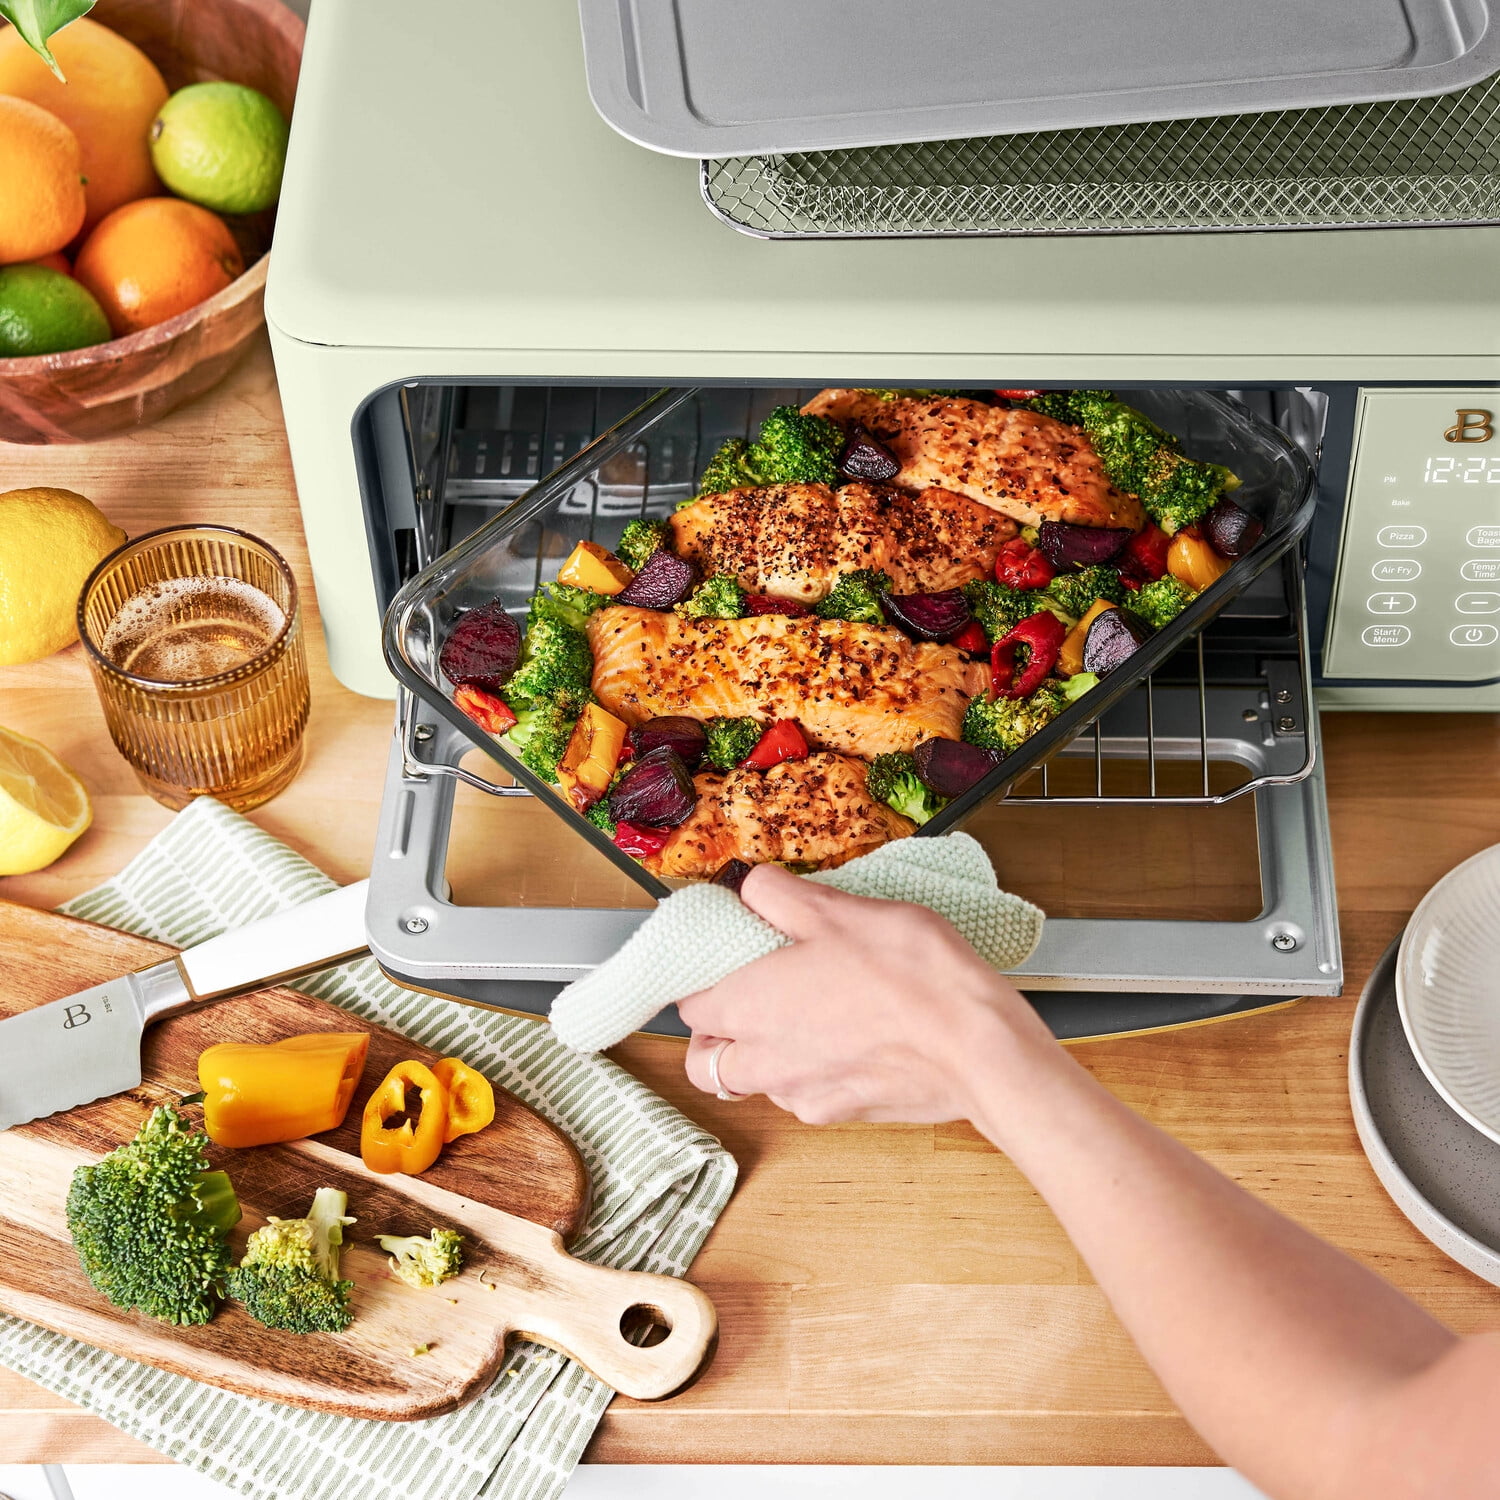 howcoolmall 6 Slice Touchscreen Air Fryer Toaster Oven, Black Sesame By  Drew Barrymore